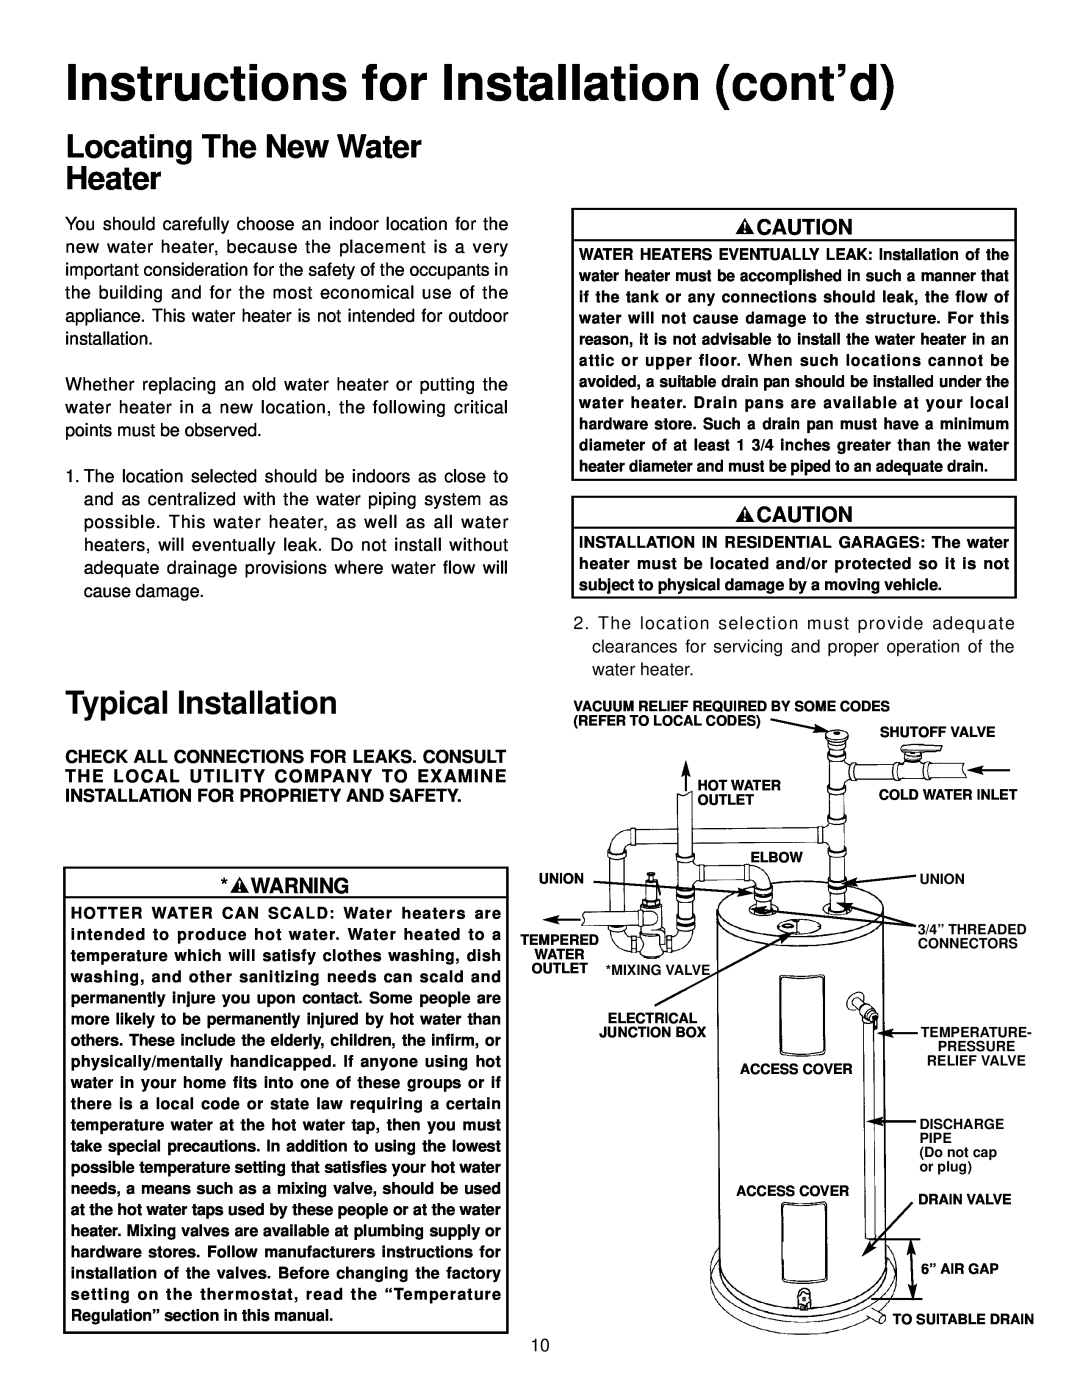 Maytag HR650SJLS, HR652SJRT manual Instructions for Installation cont’d, Locating The New Water Heater, Typical Installation 